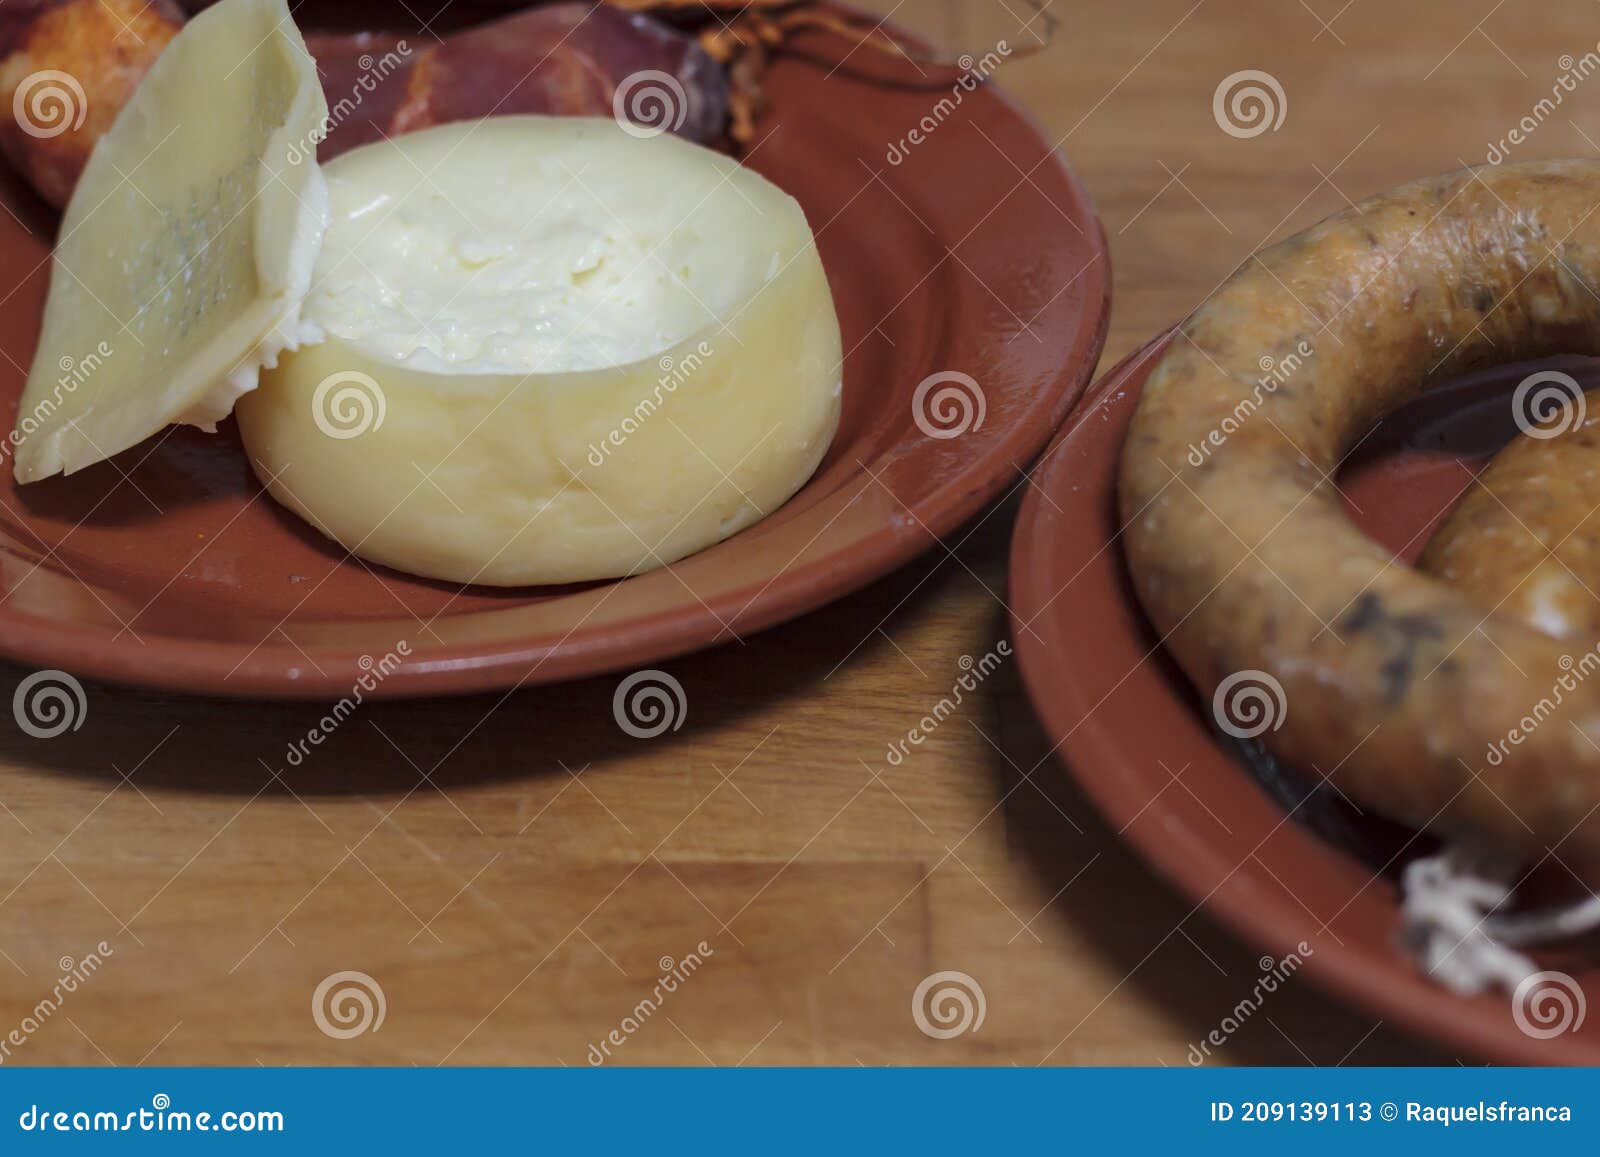 sheep's milk cheese and portuguese smoked sausage on clay plates